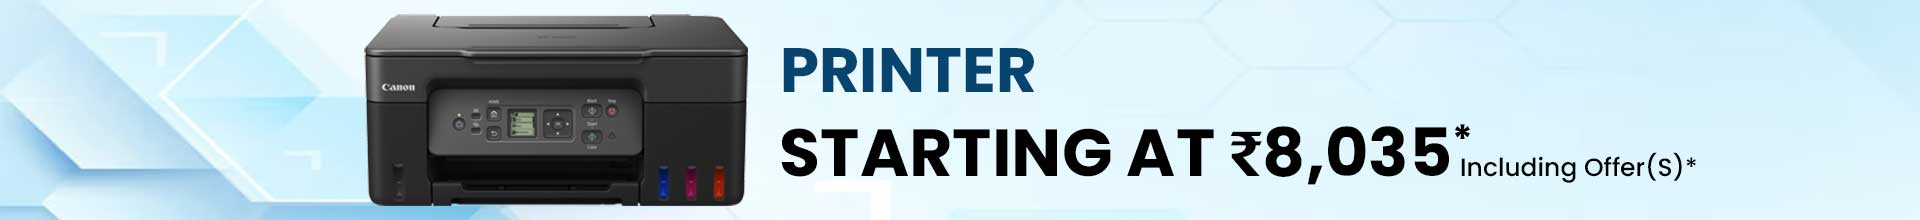 Printer-category-page-banner